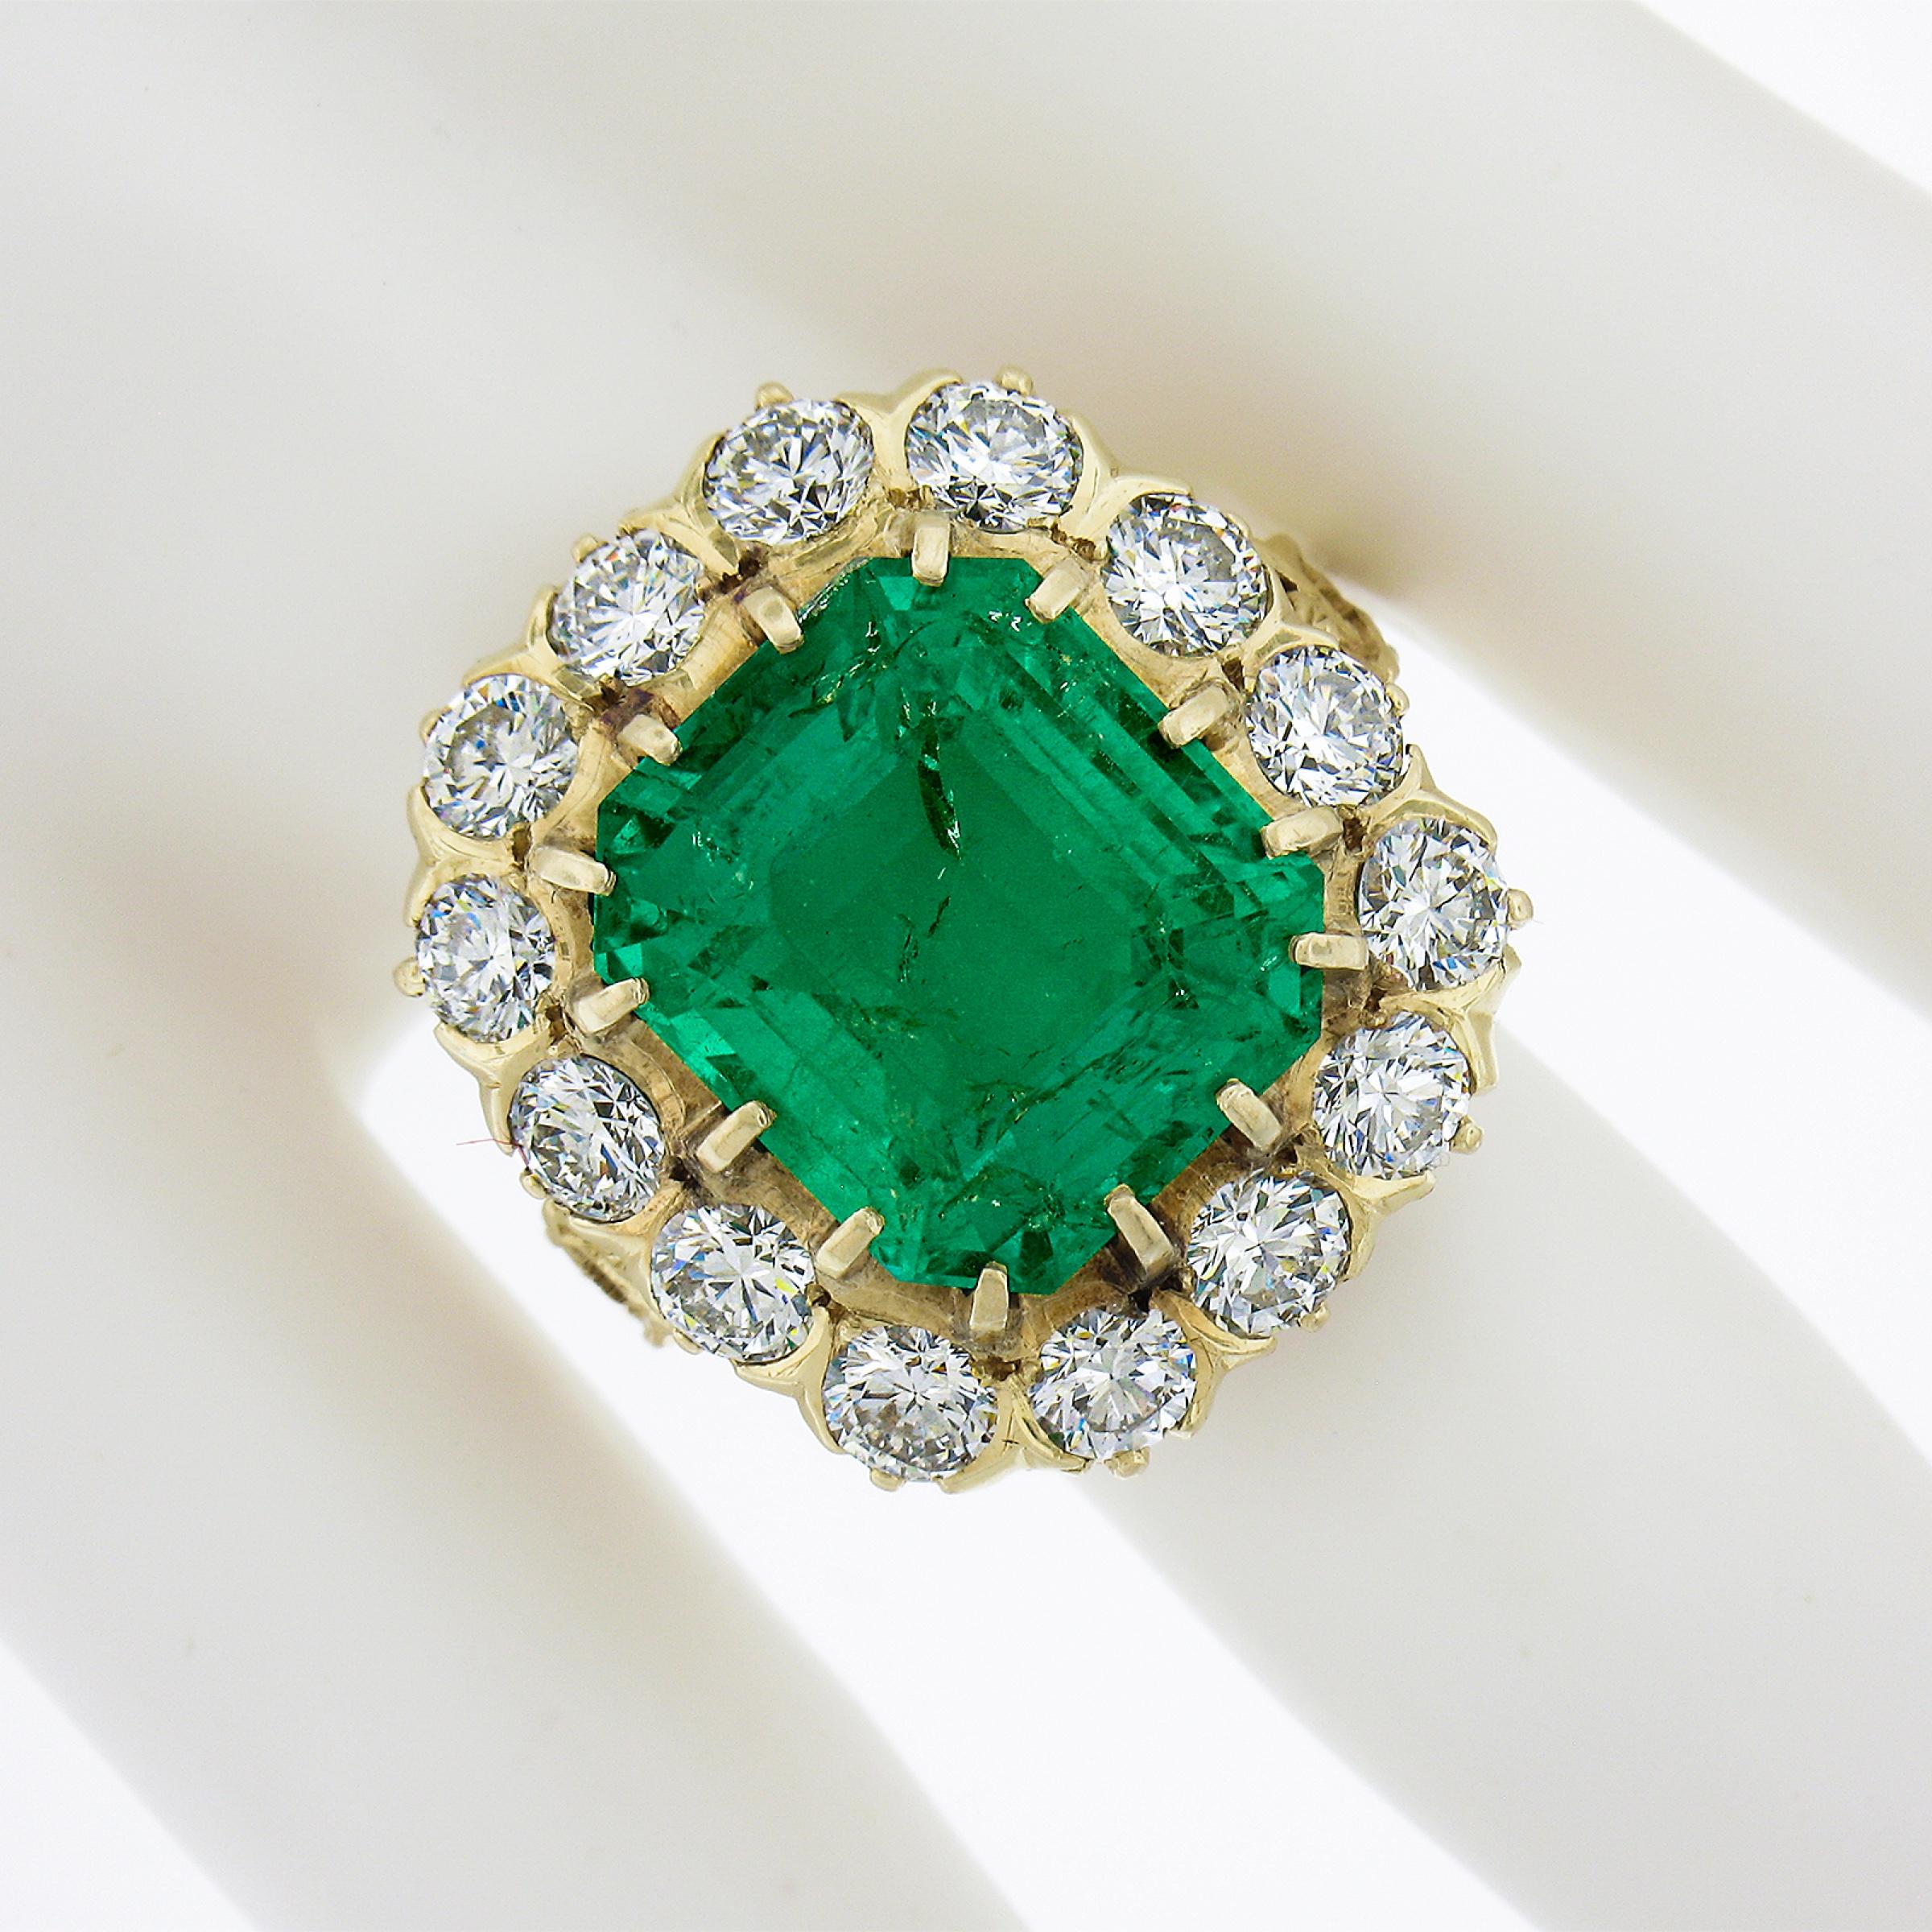 VERY FINE 18k Gold 14.3ctw AGL Colombian Emerald & Diamond Halo Cocktail Ring In Good Condition For Sale In Montclair, NJ